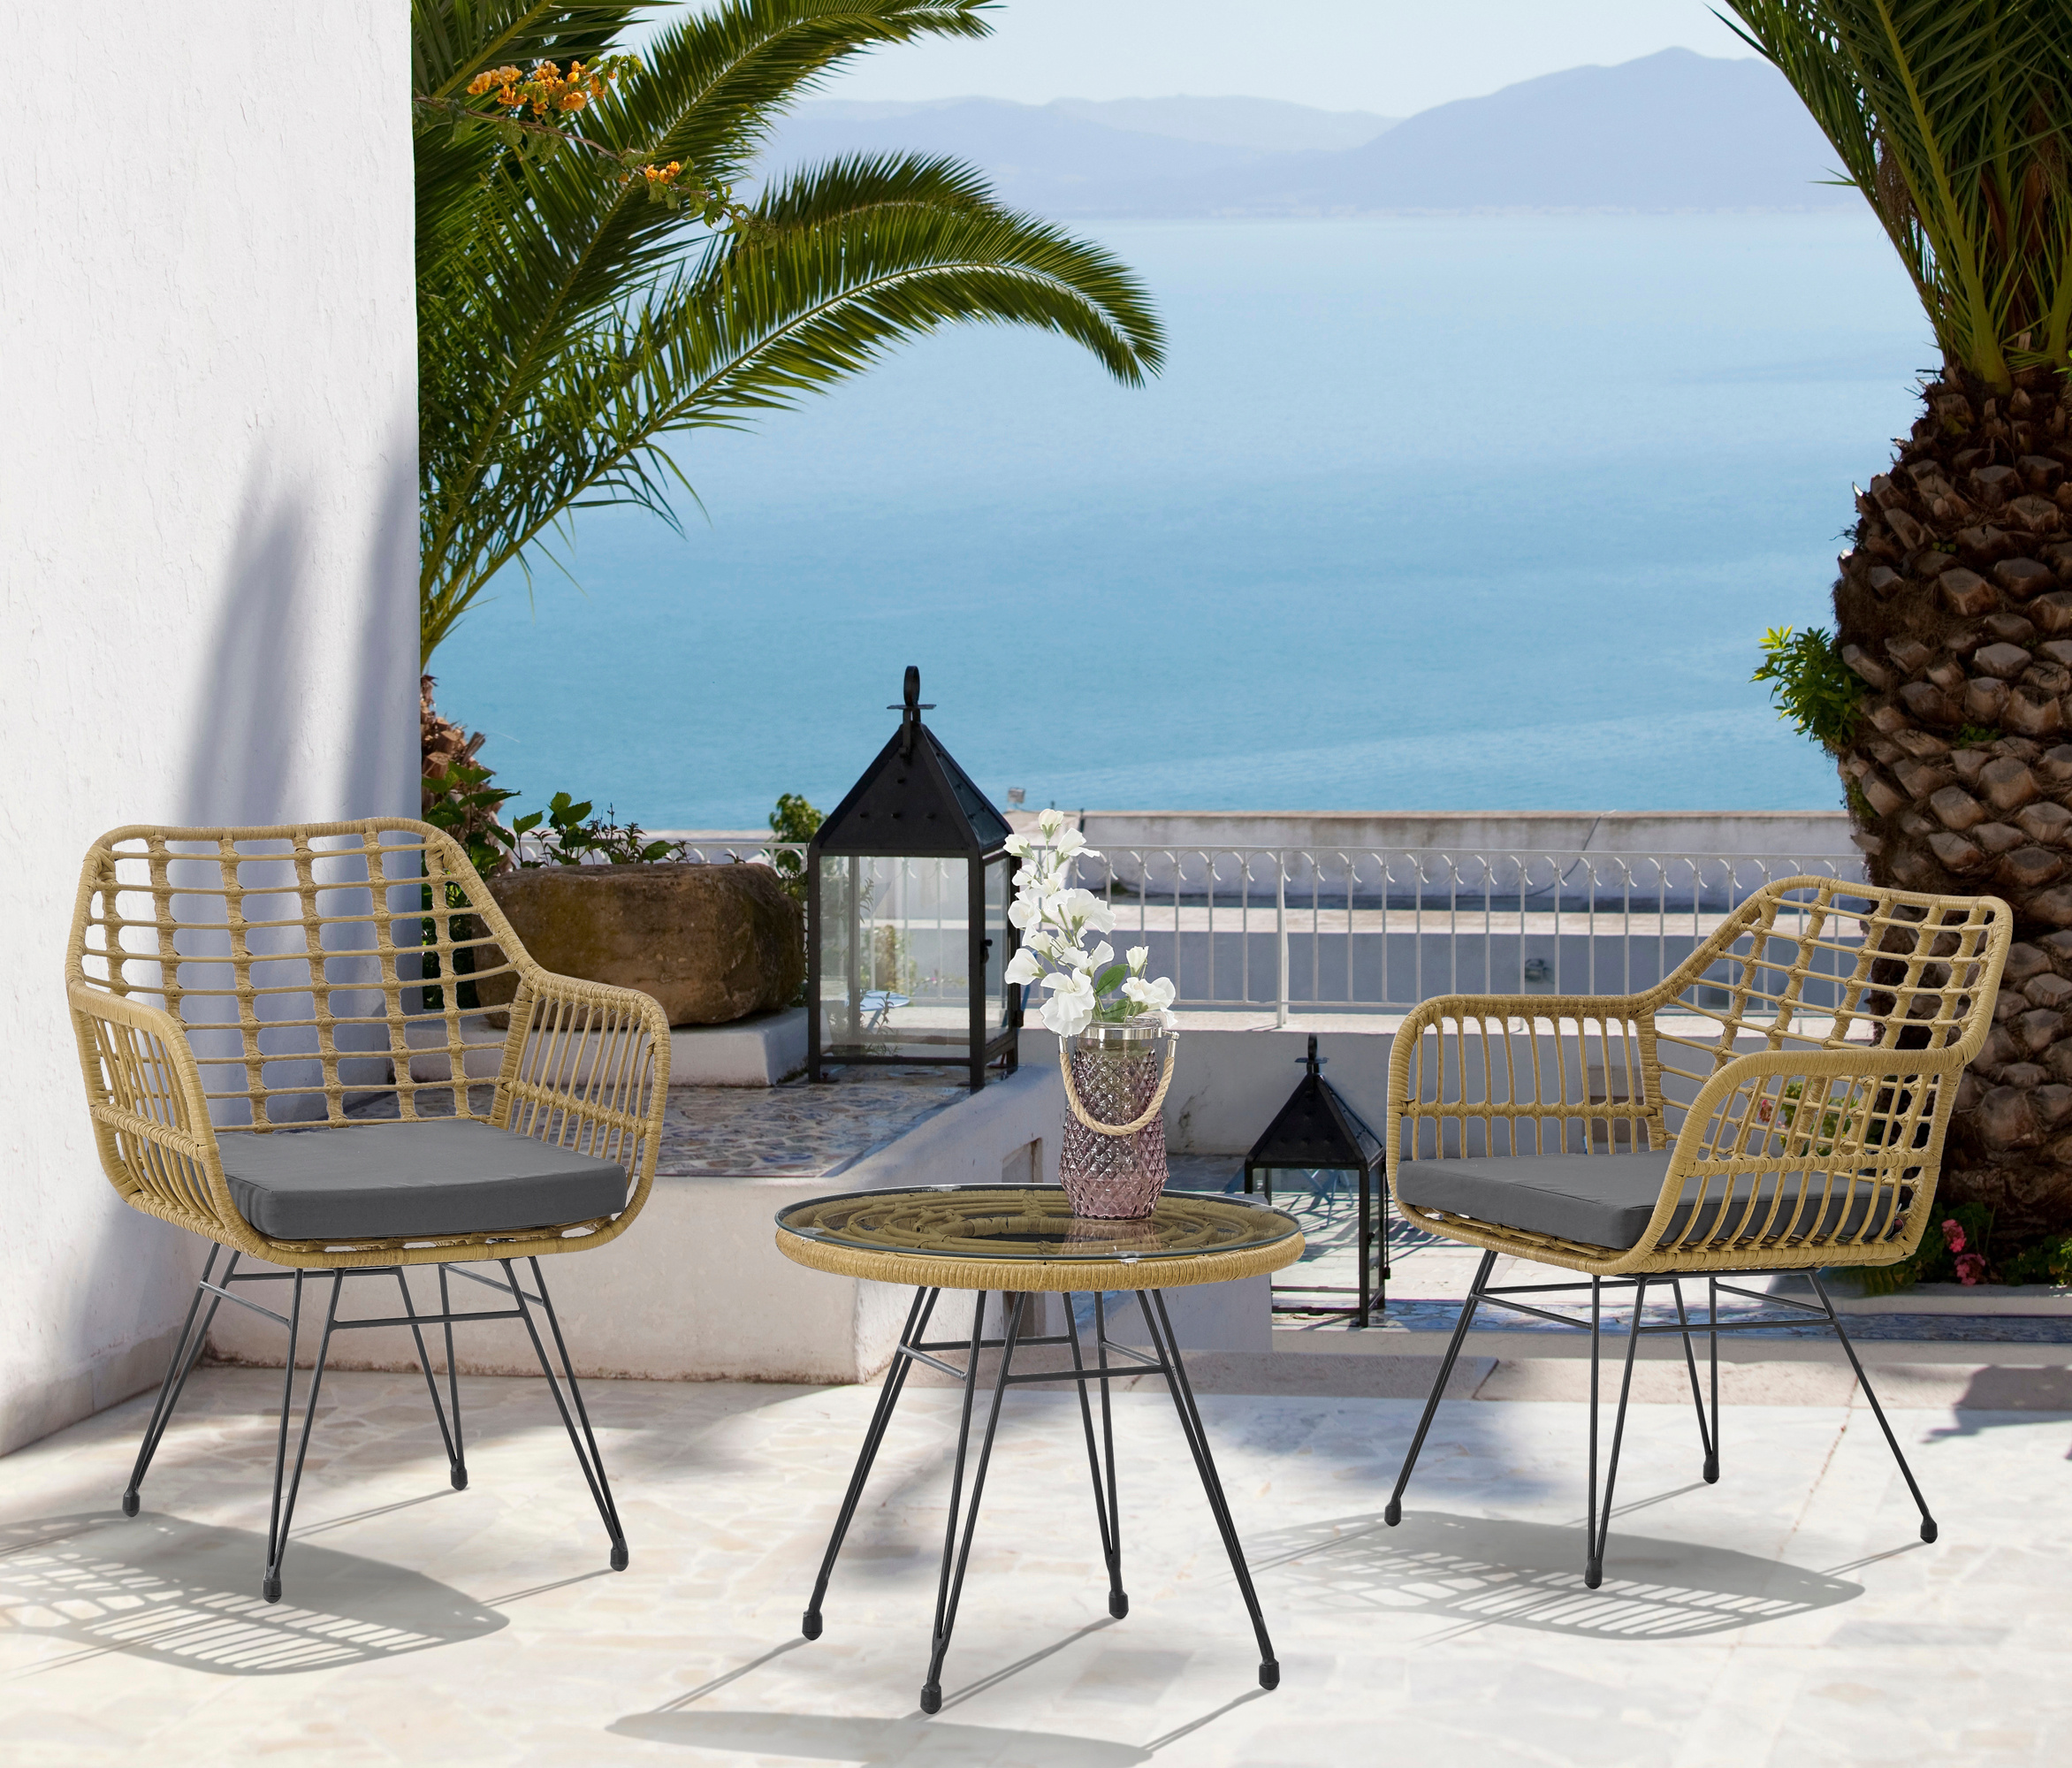 Aukfa 3 Pieces table set,Modern Rattan Coffee Chair Table Set,Outdoor Furniture Rattan Chair,Garden Set with Two Chair and One Table,Conversation Set - image 2 of 9